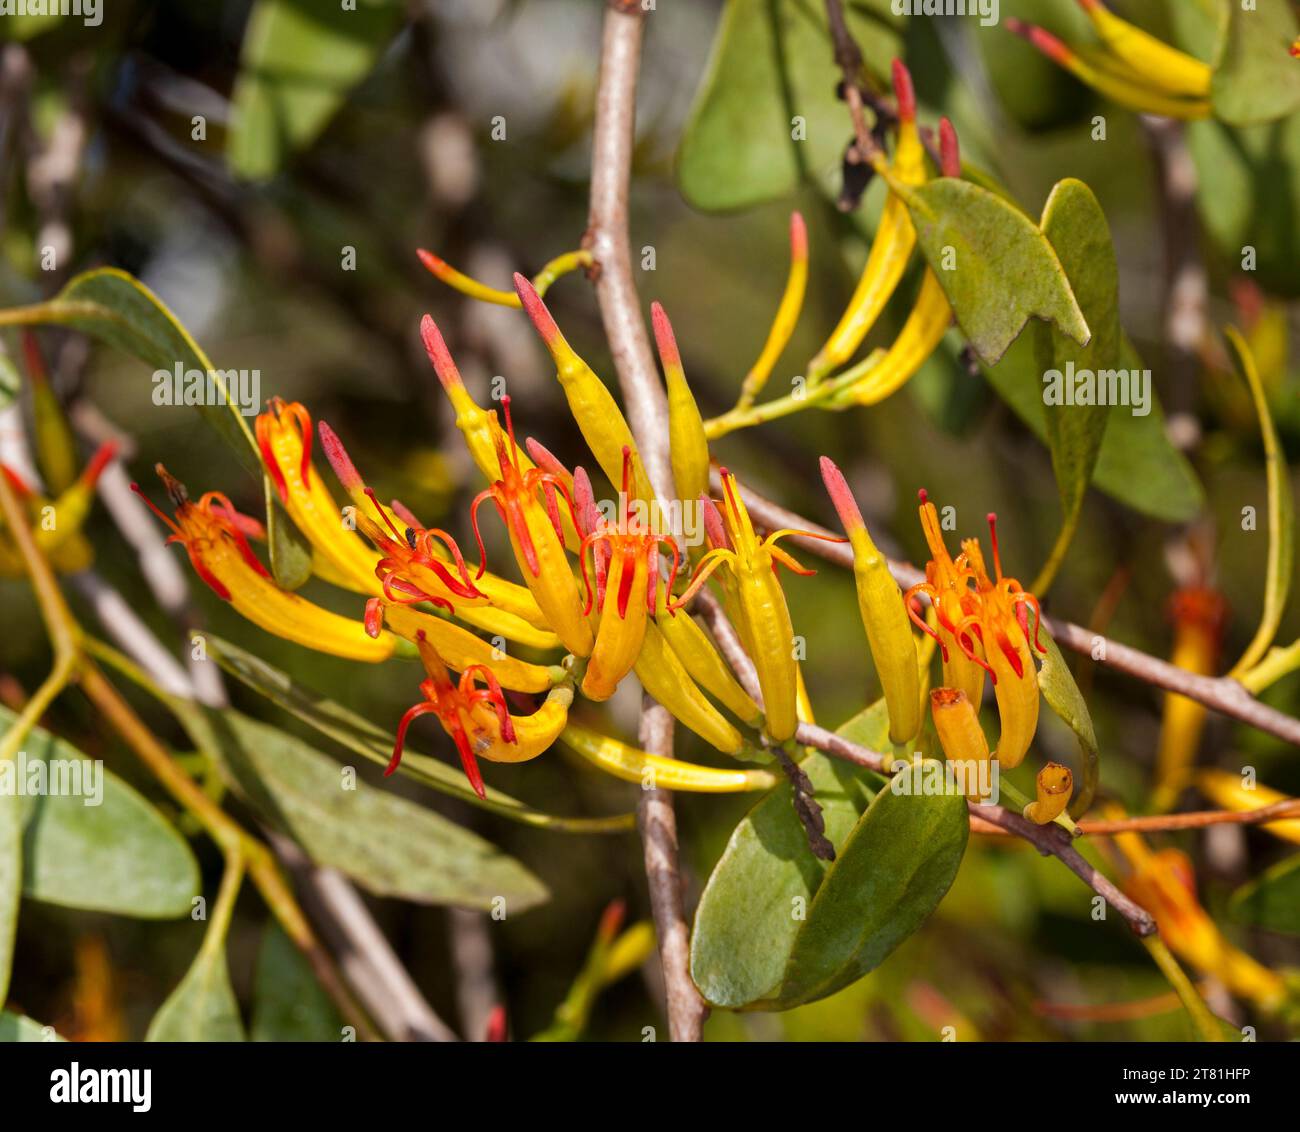 Cluster of vivid orange and red-tipped tubular flowers and green leaves of mistletoe, a parasitic plant, growing in Australian Stock Photo